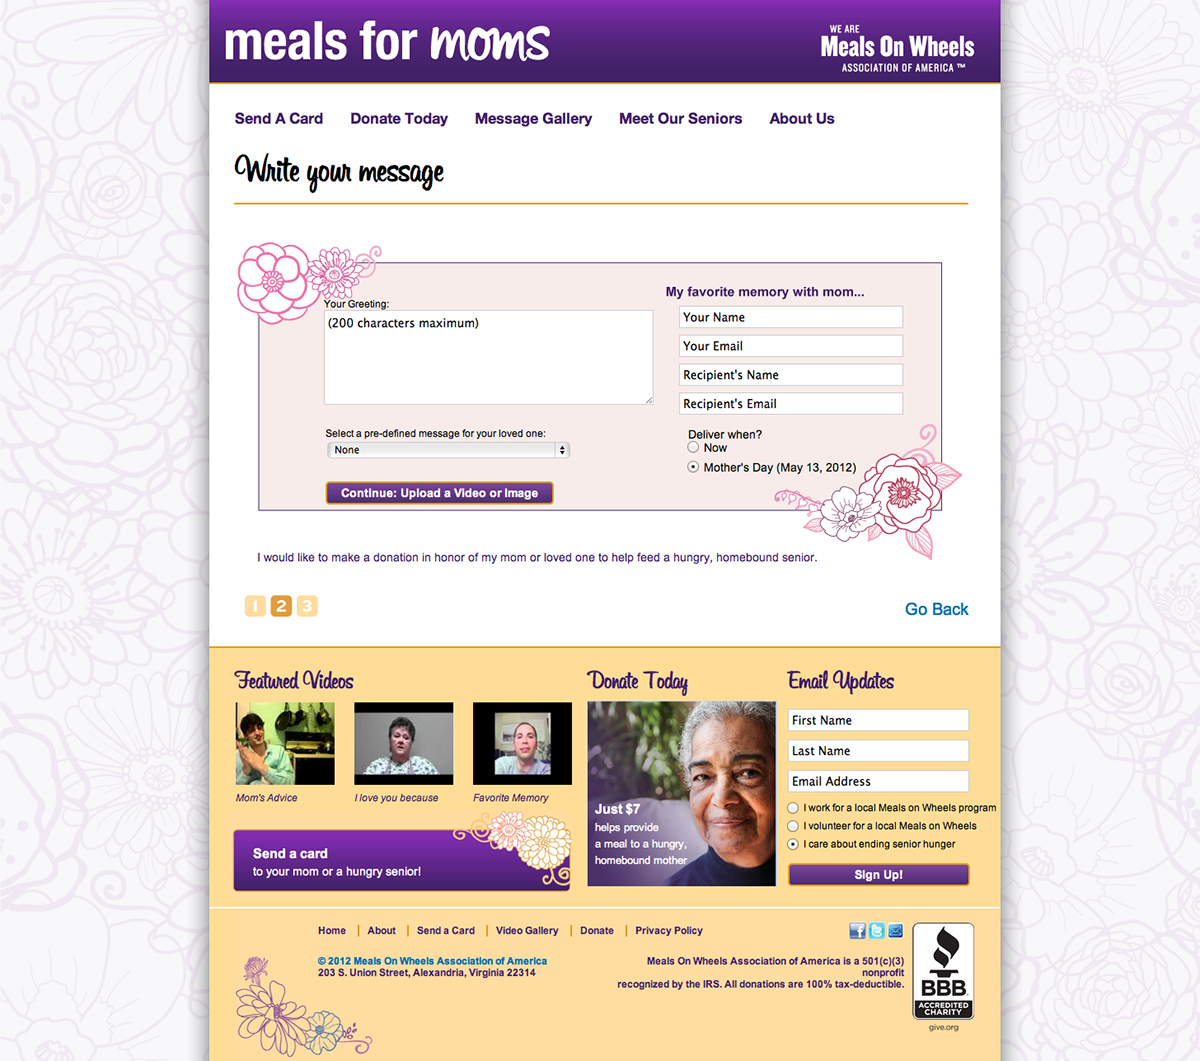 mothers day Meals On Wheels Meals for Moms